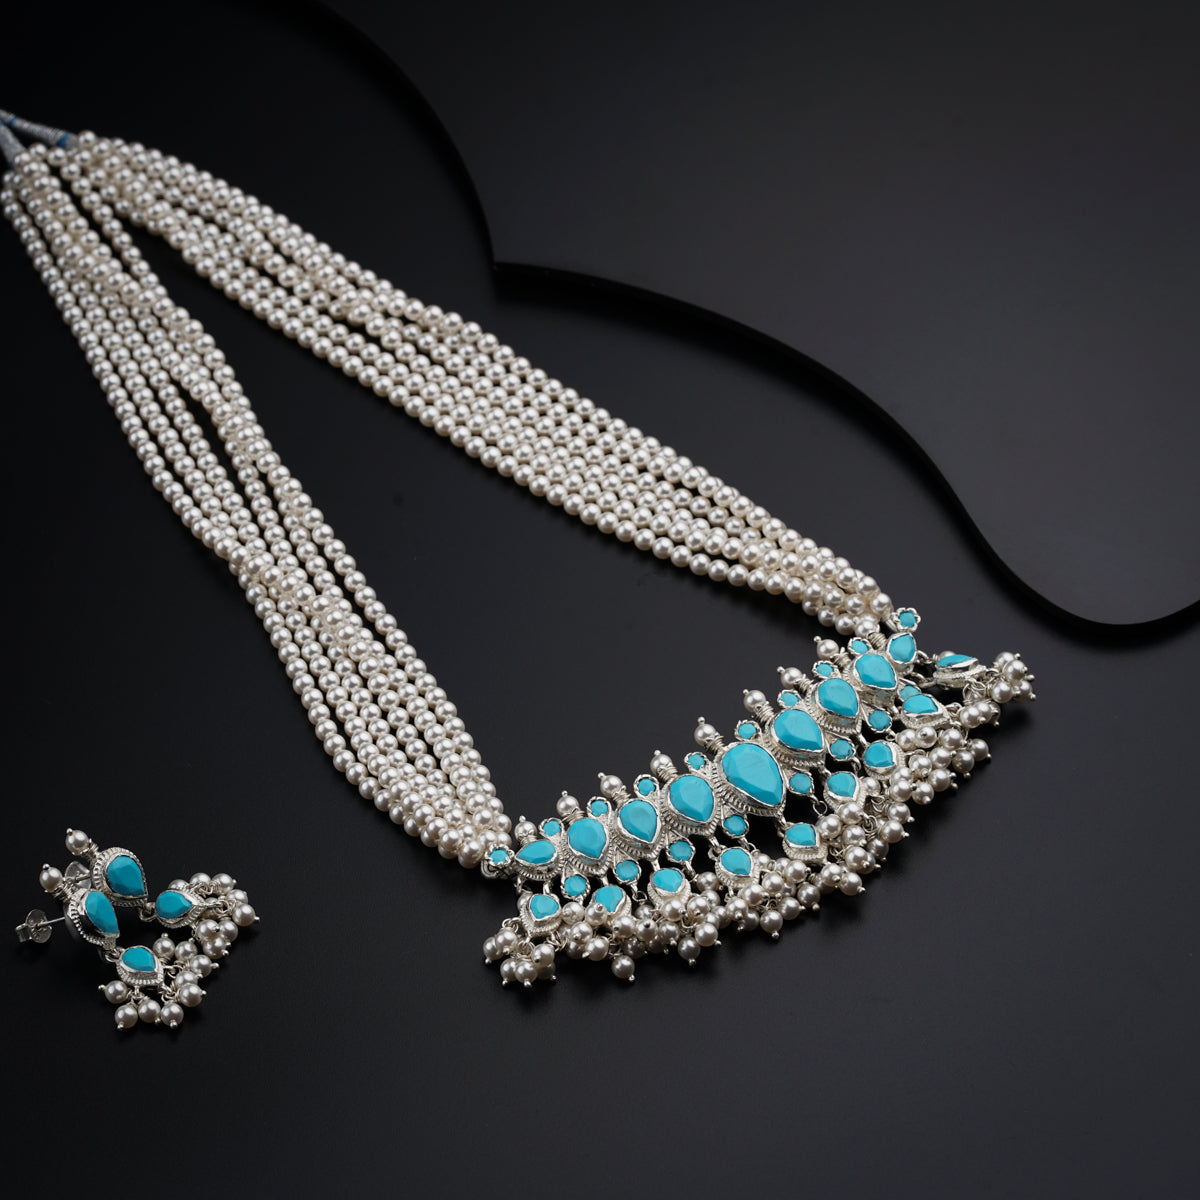 a necklace with pearls and turquoise stones on a black surface